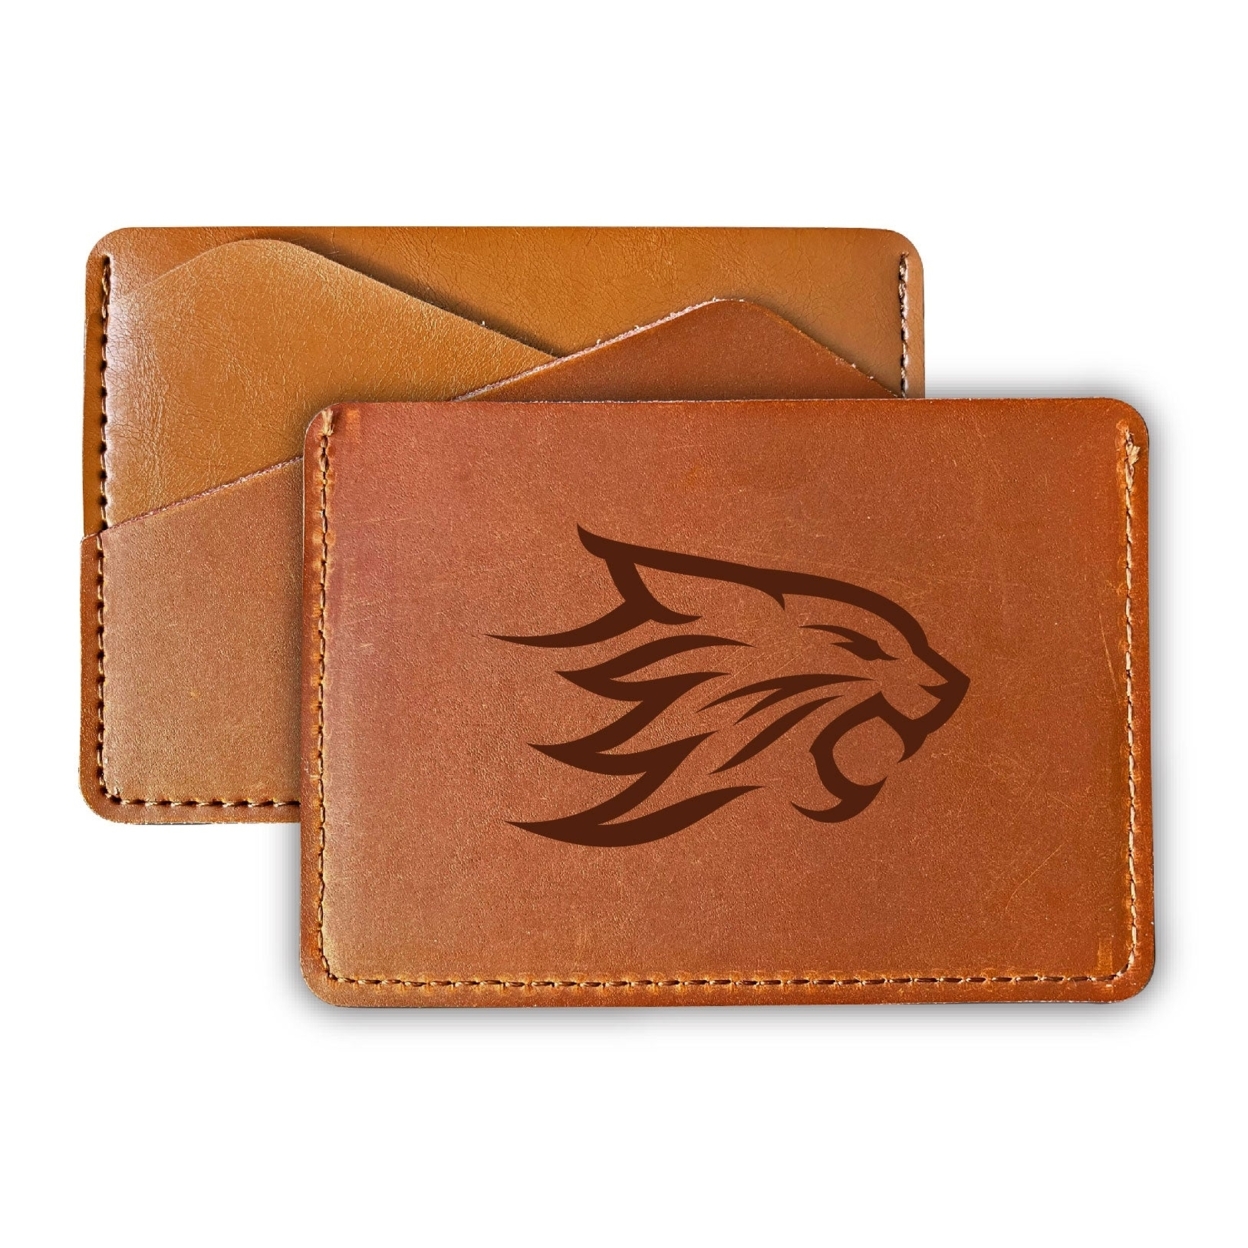 California State University, Chico College Leather Card Holder Wallet